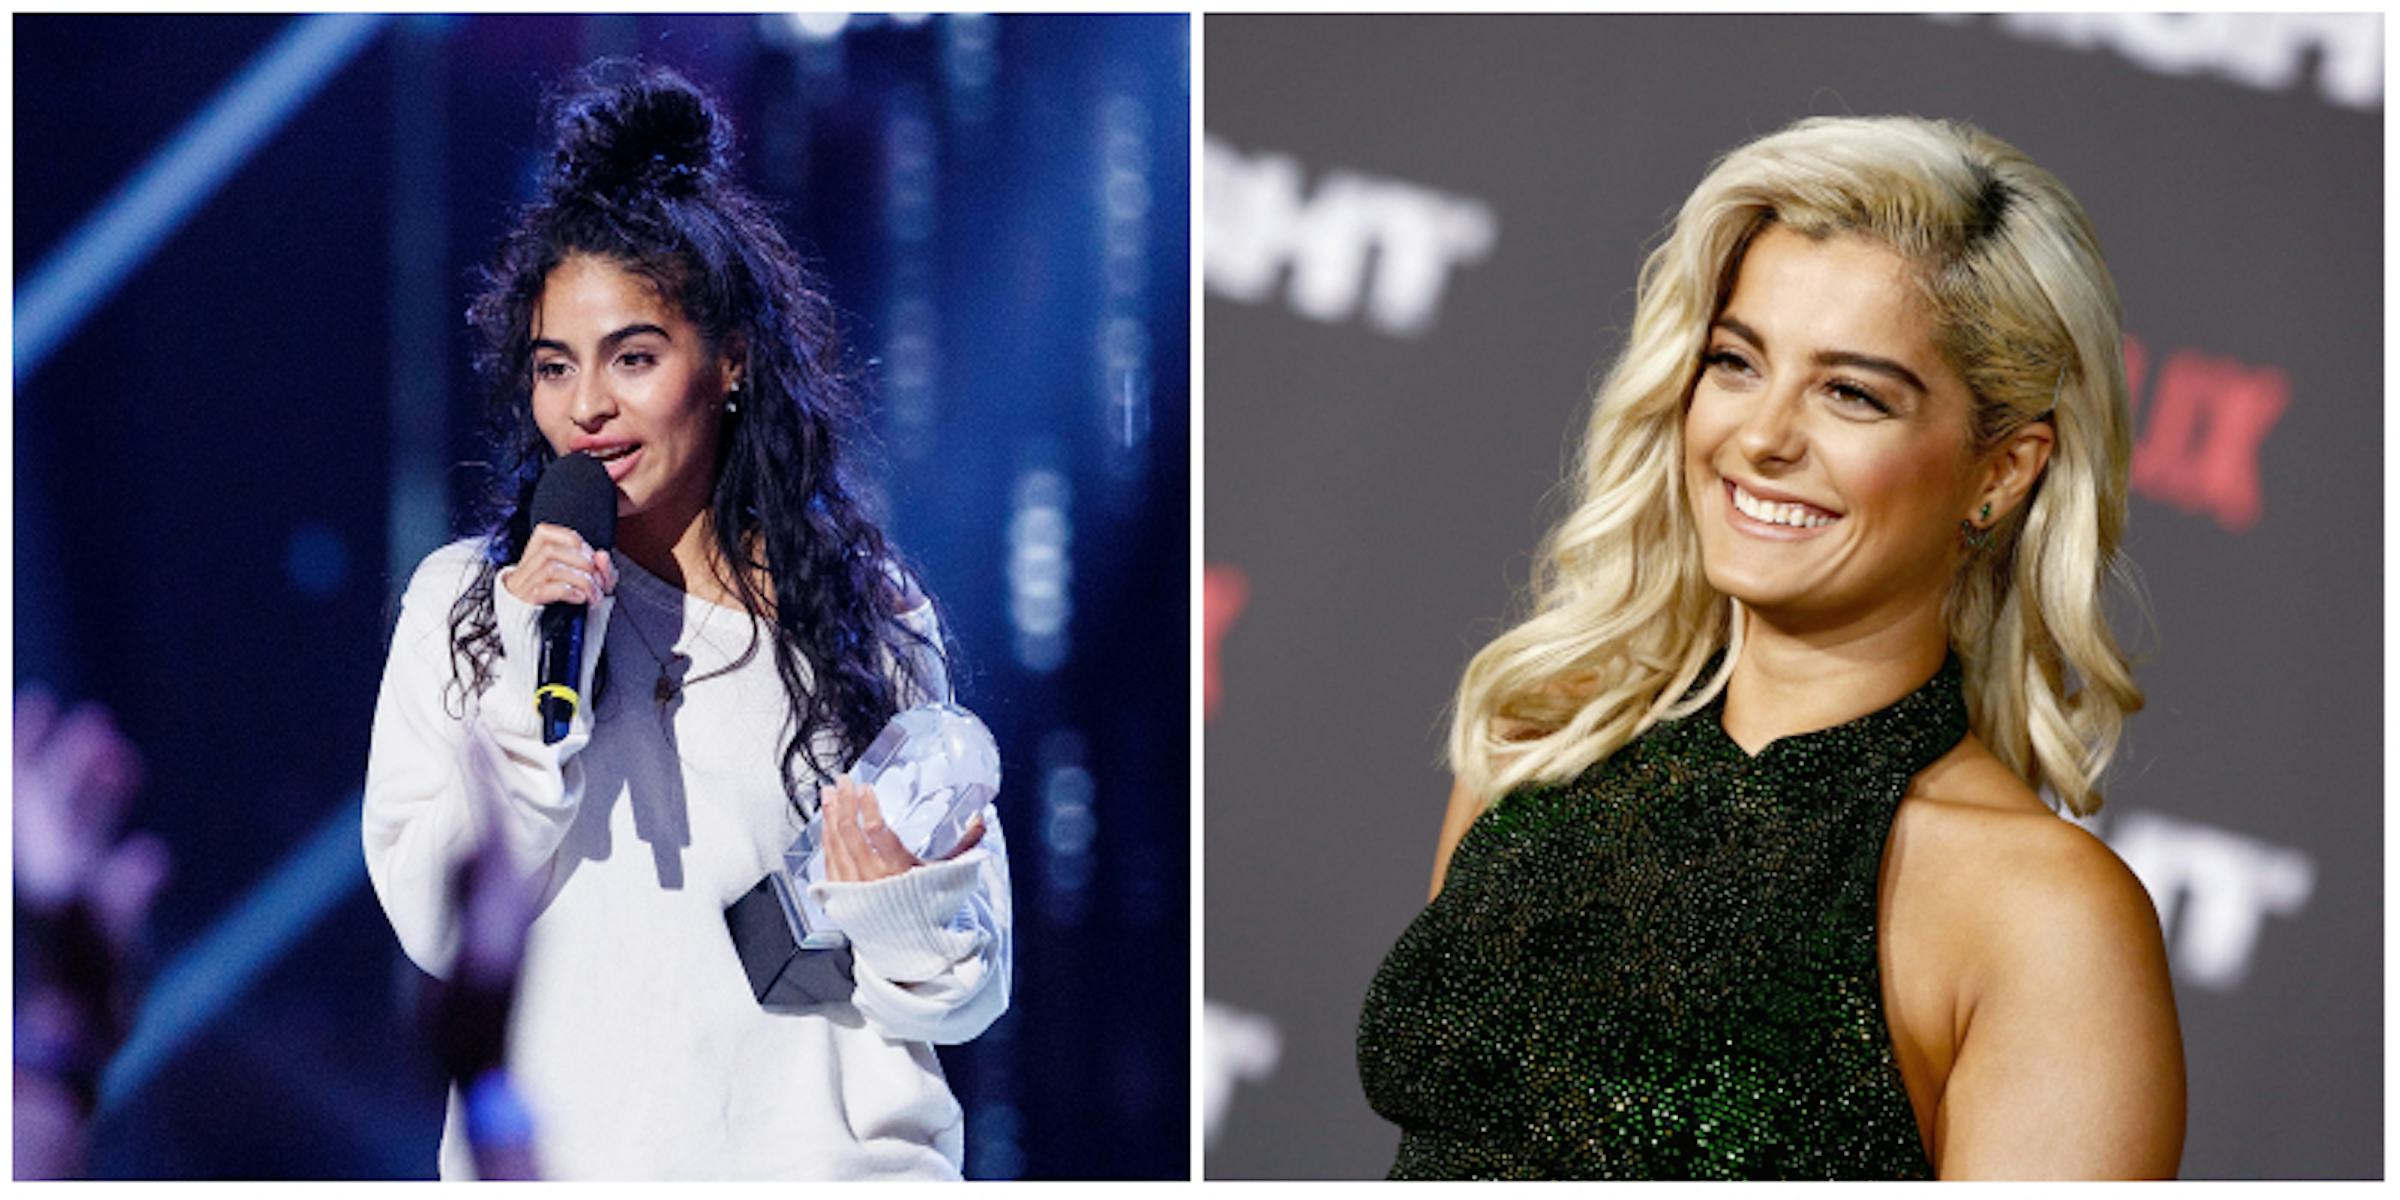 Jessie Reyez And Bebe Rexha Accuse Beyoncé Producer Of Sexual Misconduct